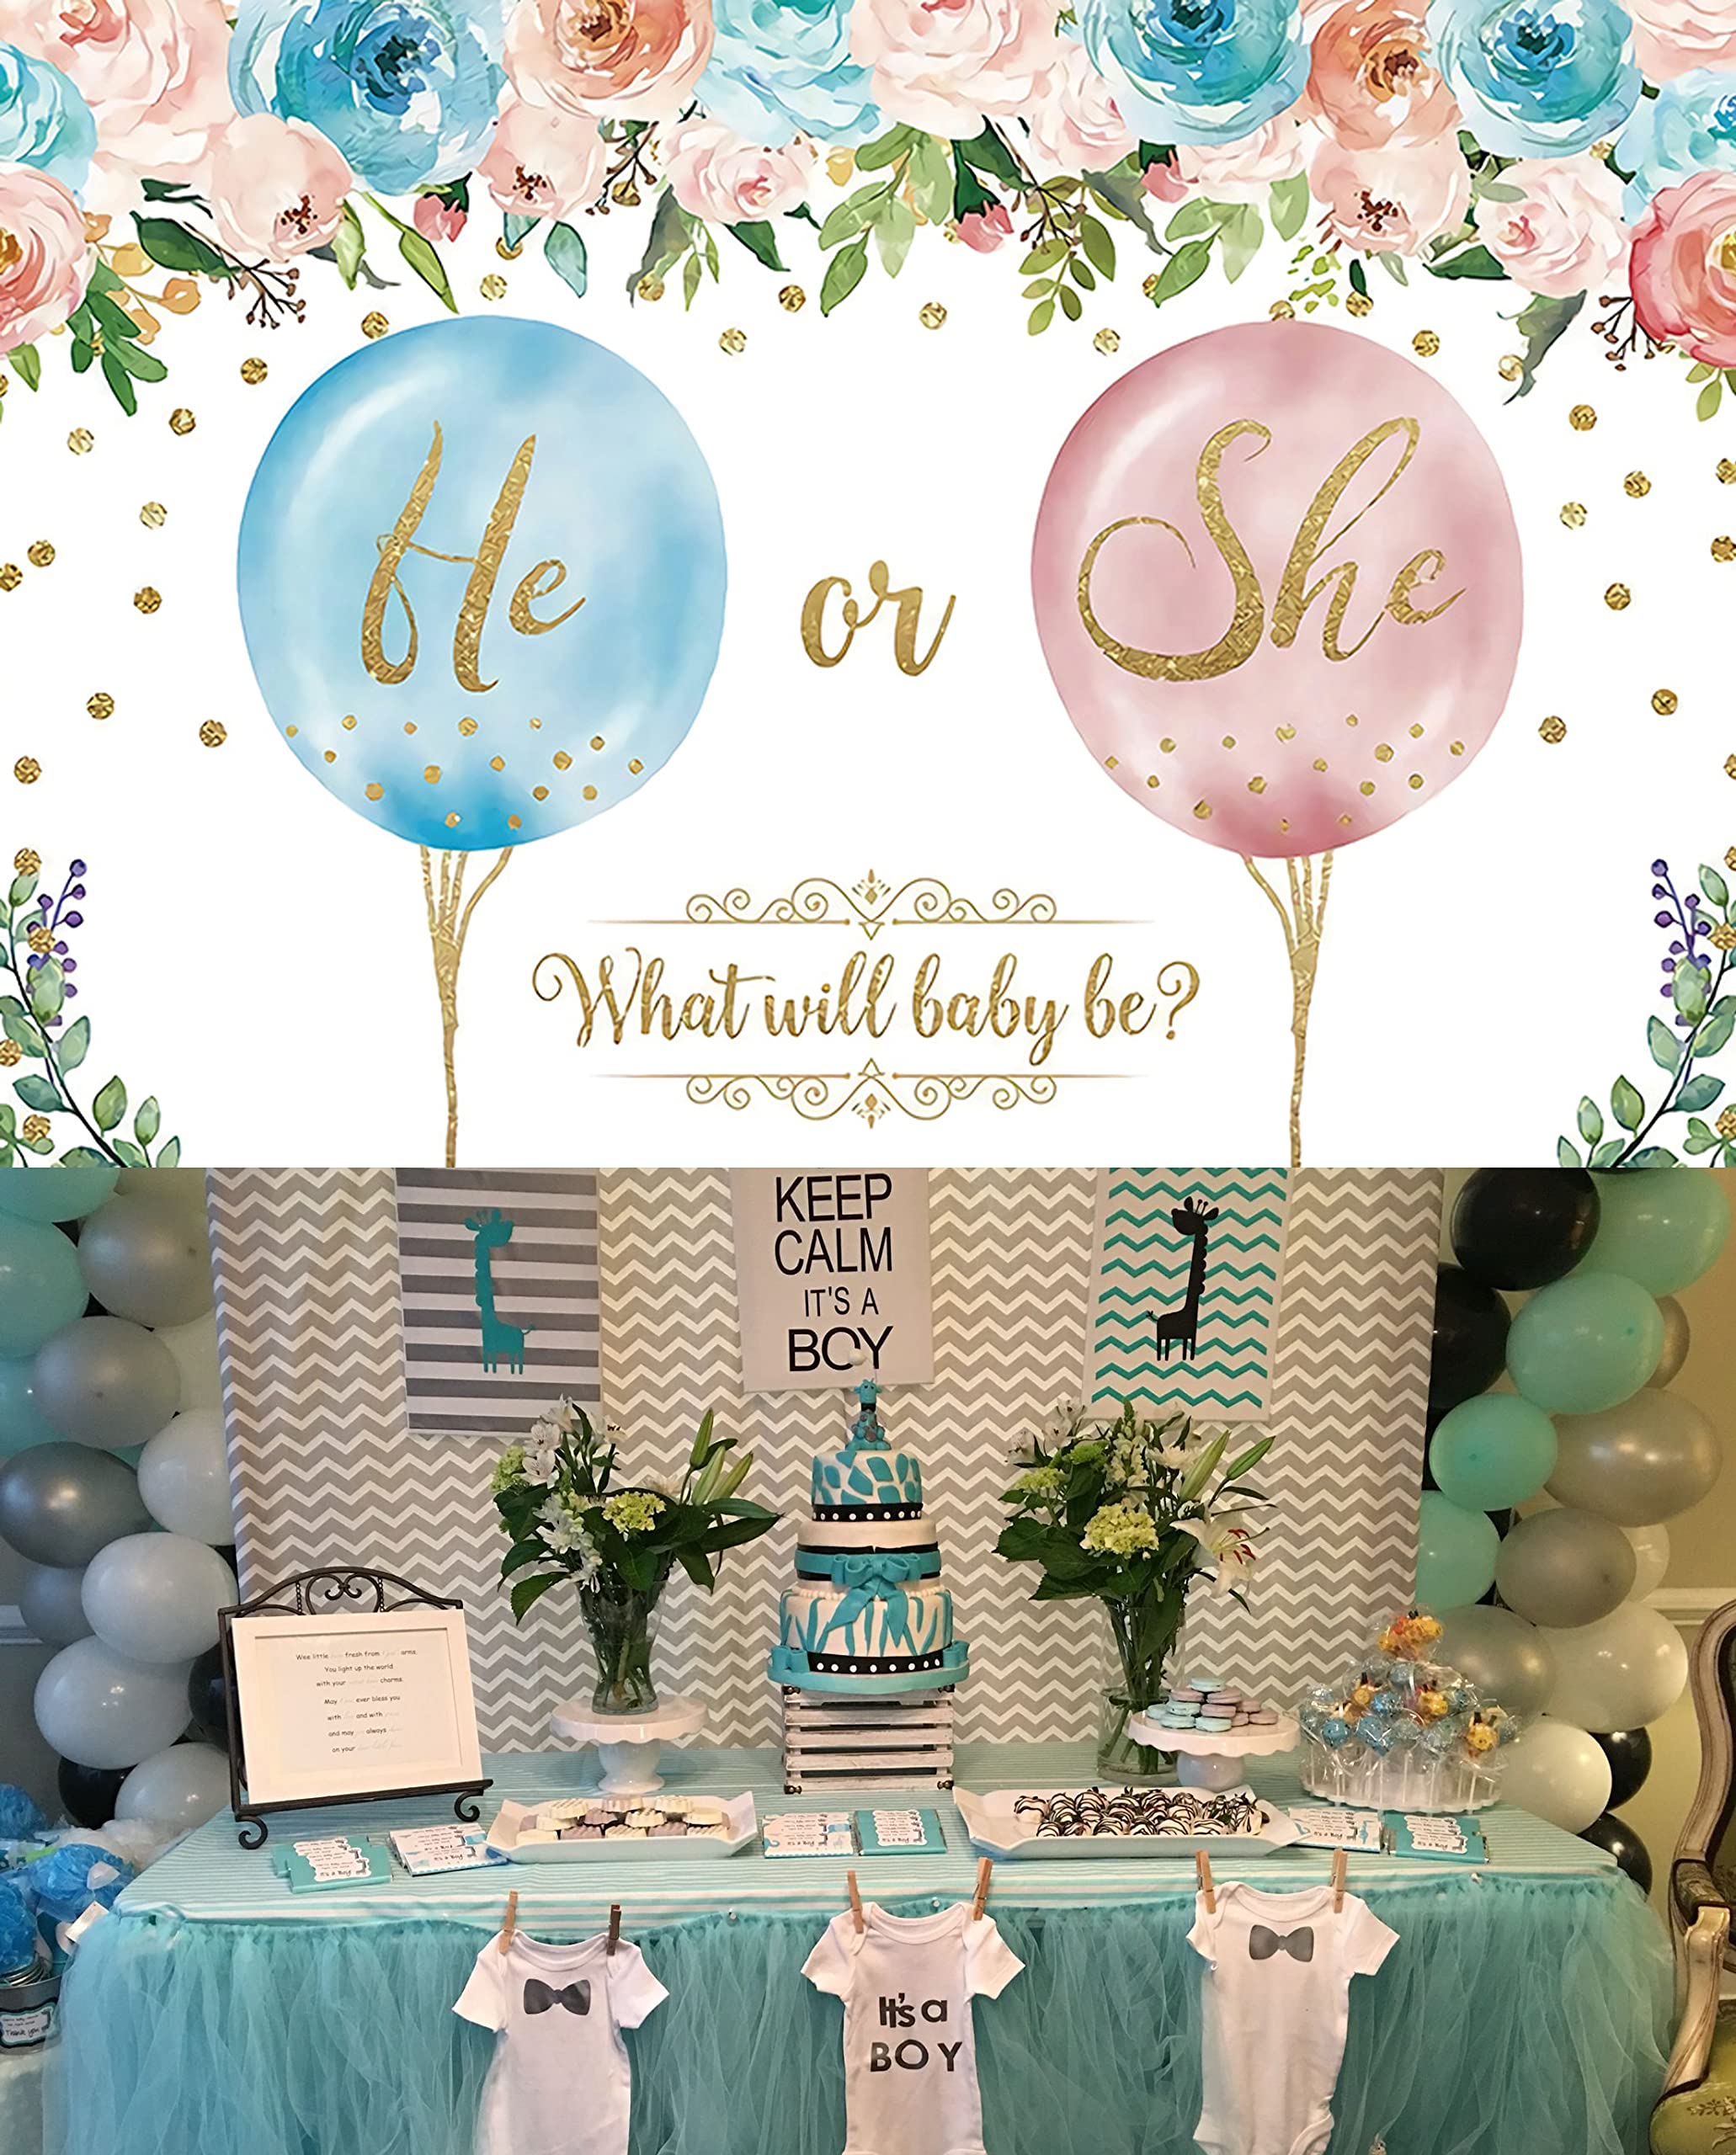 Baby Gender Reveal Party Decoration Baby Shower Backdrop Photo Background Banner Poster for Baby Gender Reveal Party Decorations Party Supplies 70.8 x 47.2 Inch